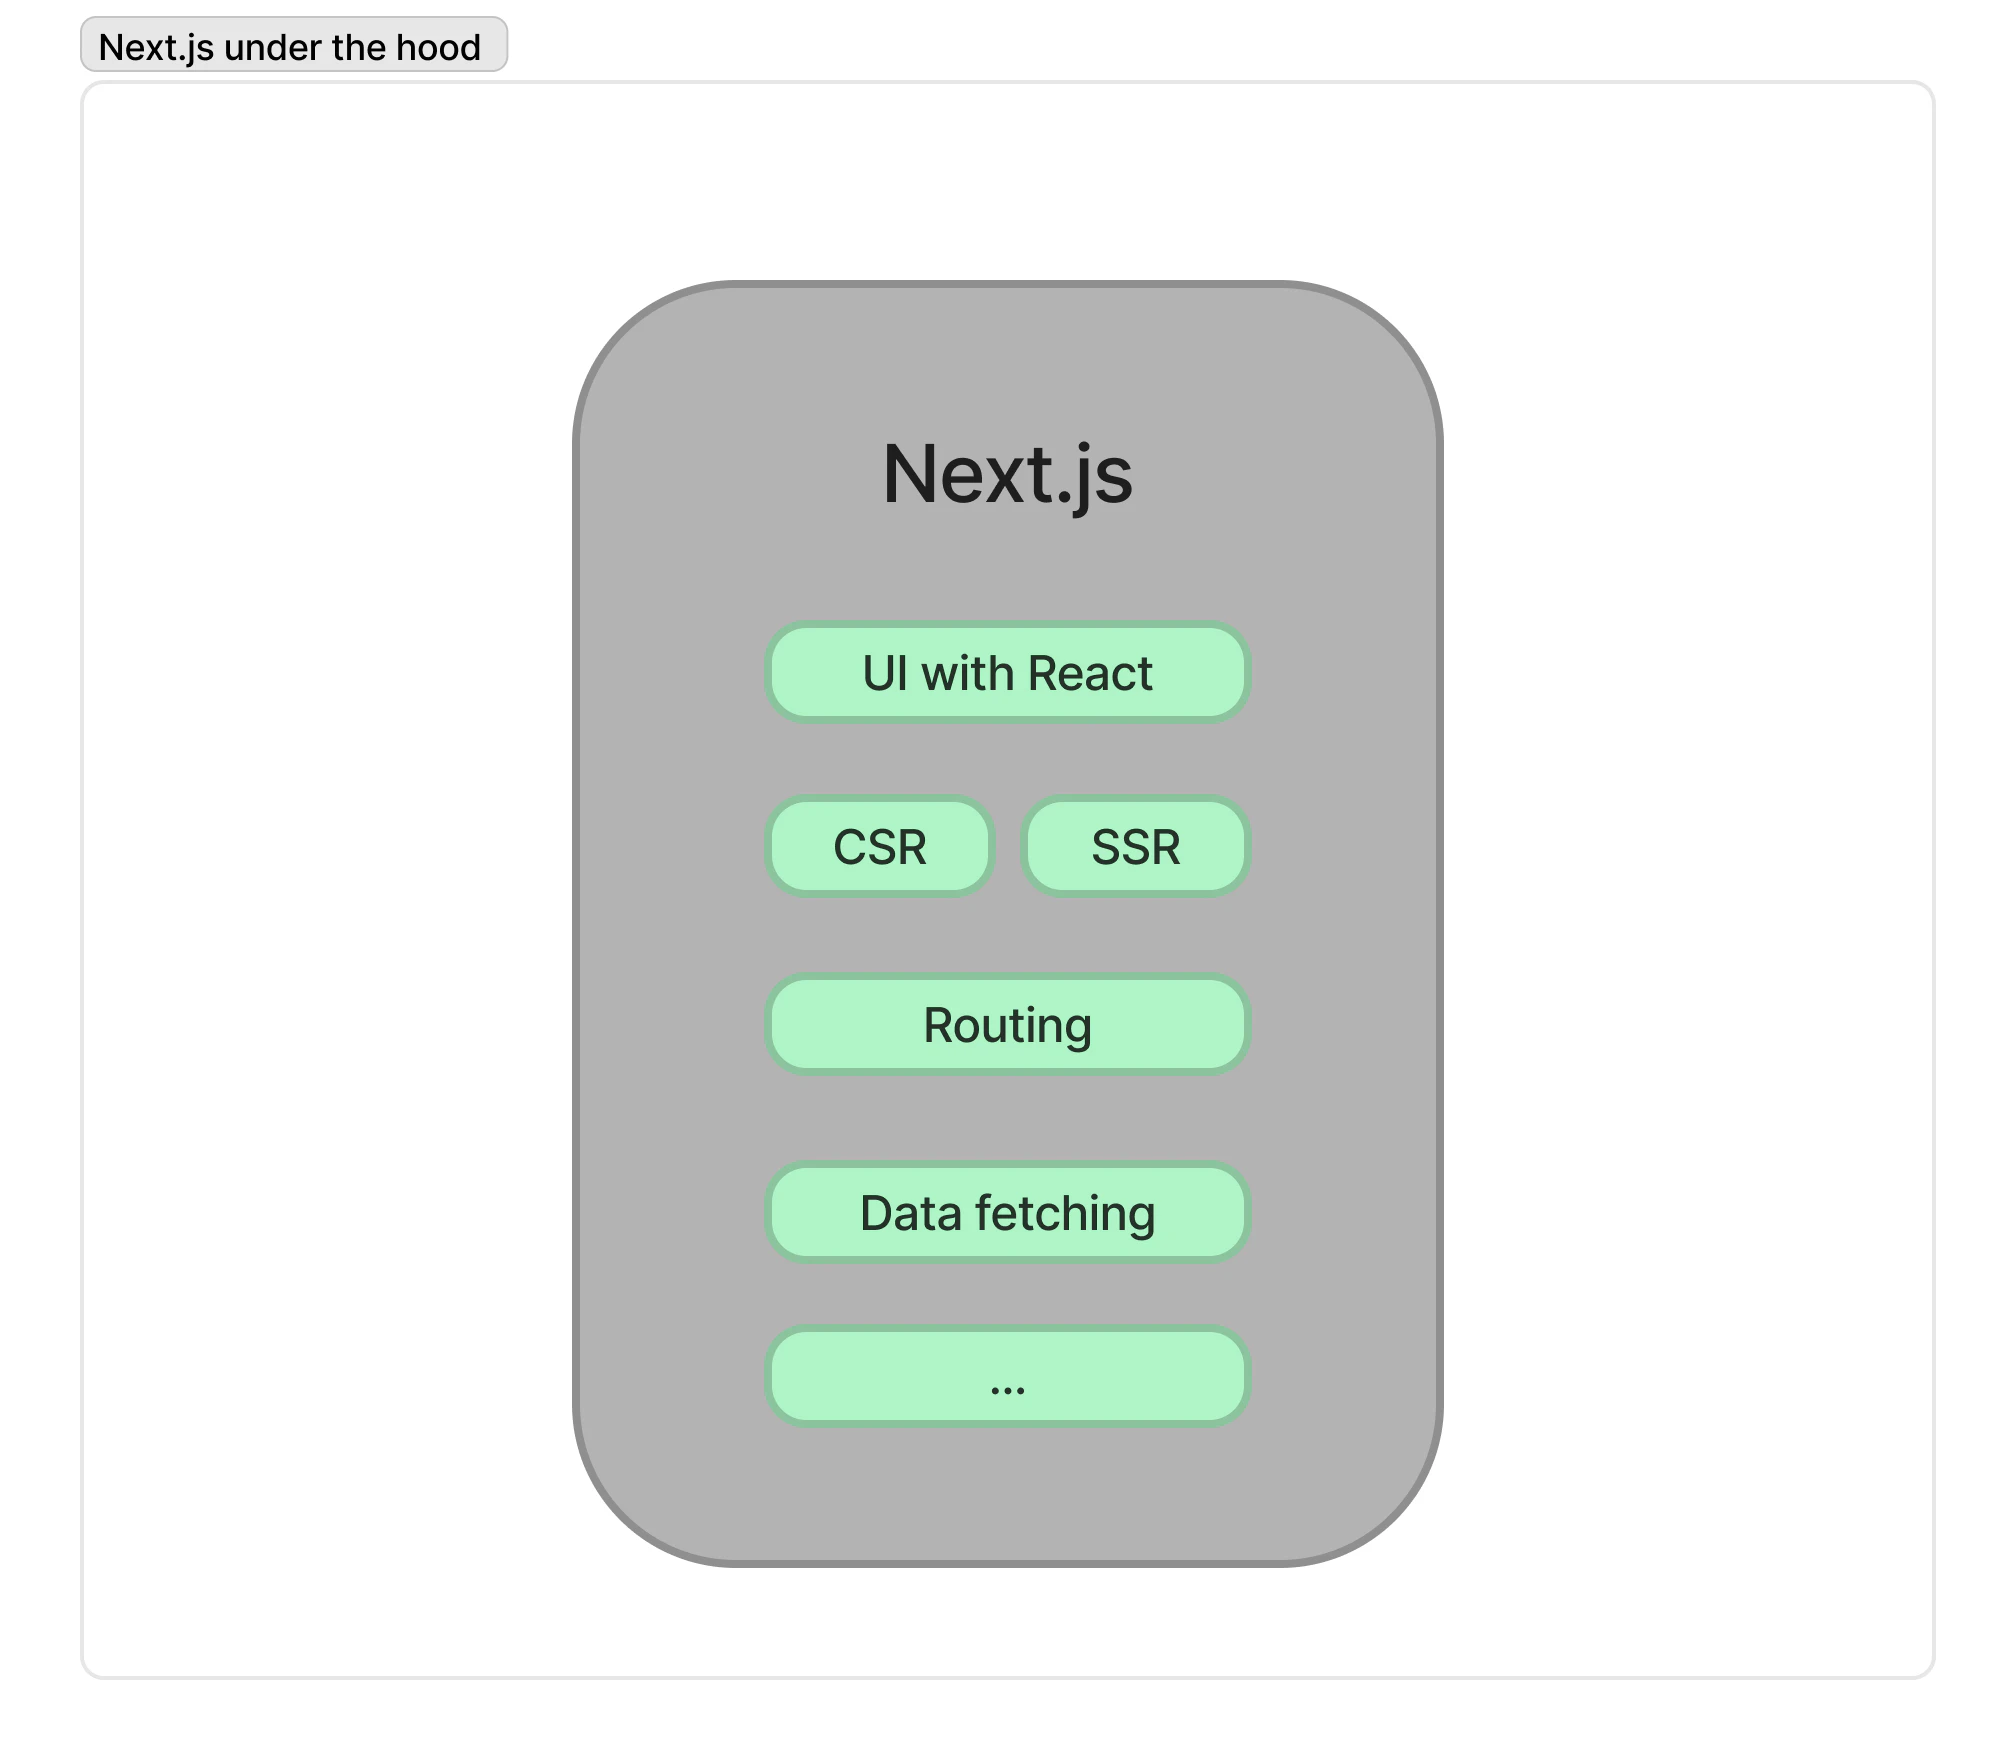 how next.js looks under the hood